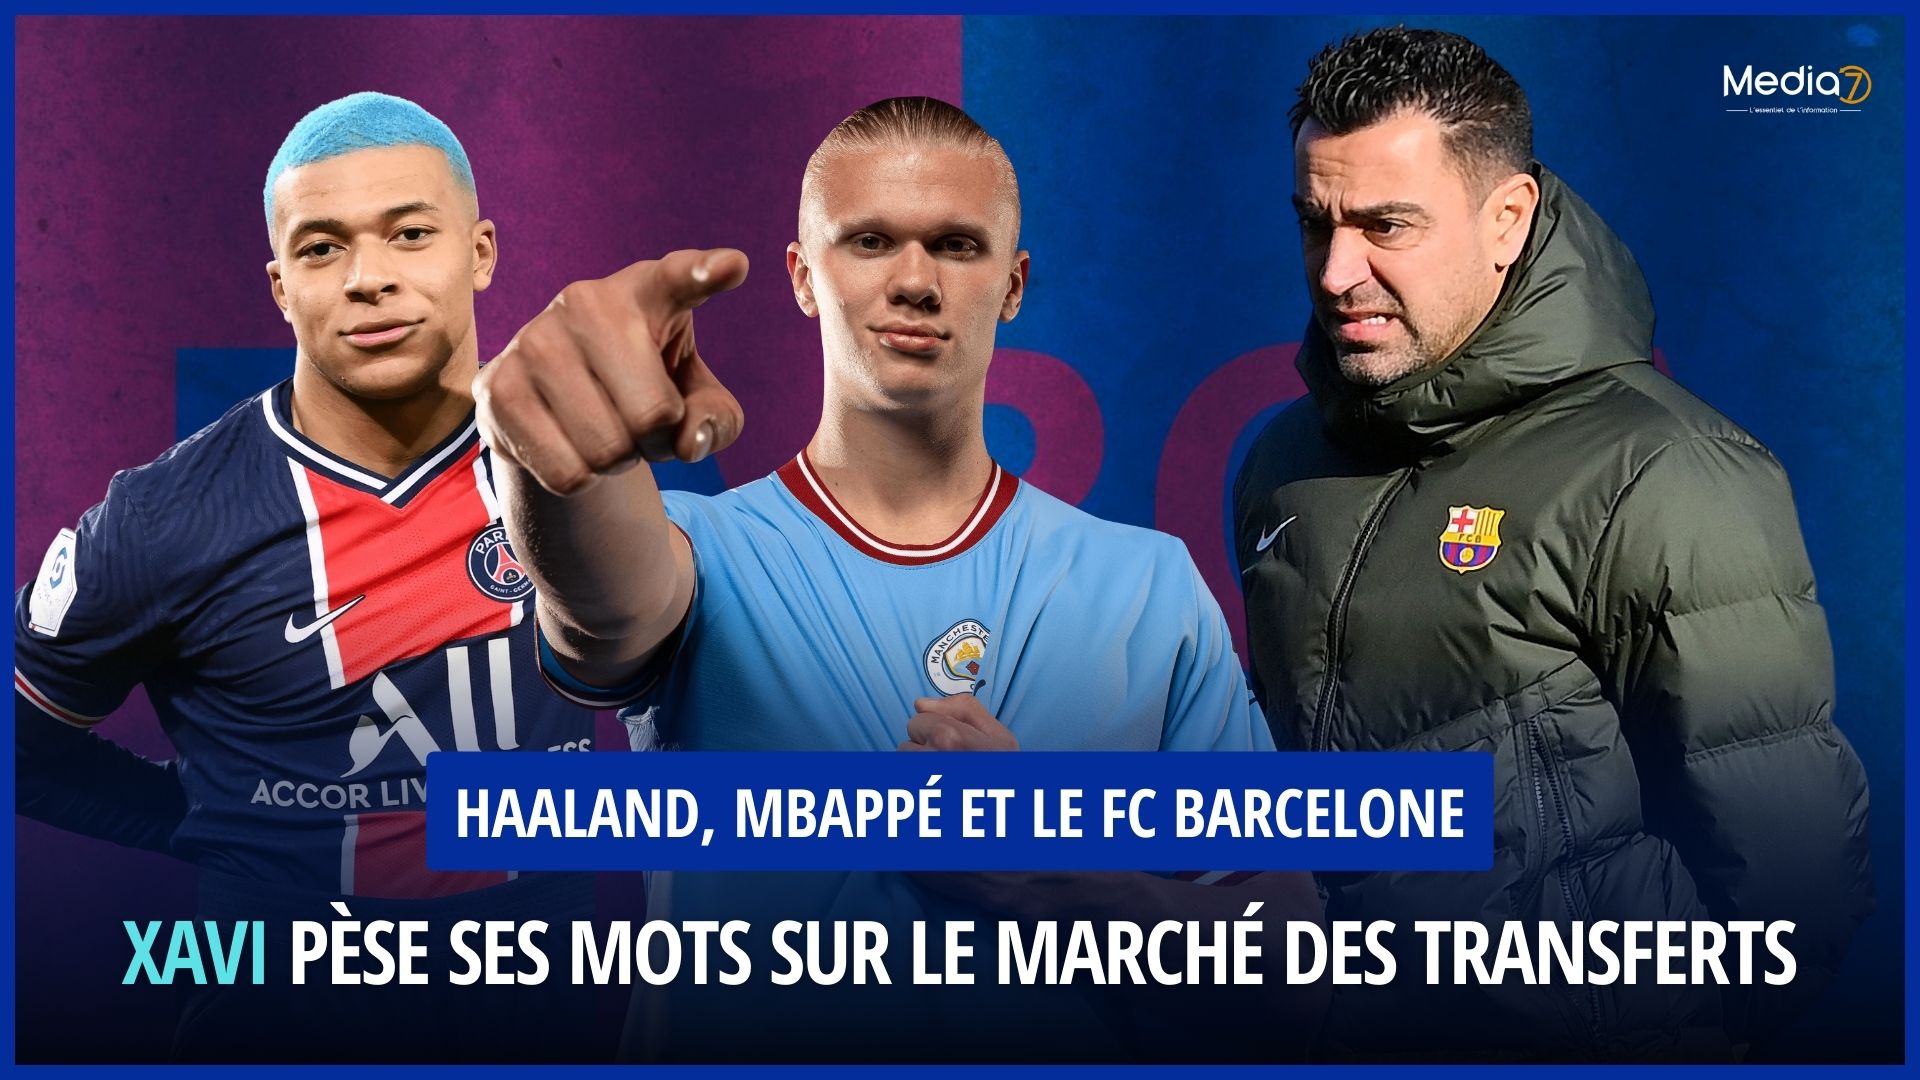 Haaland, Mbappé and FC Barcelona: Xavi weighs his words on the Transfer Market - Media7